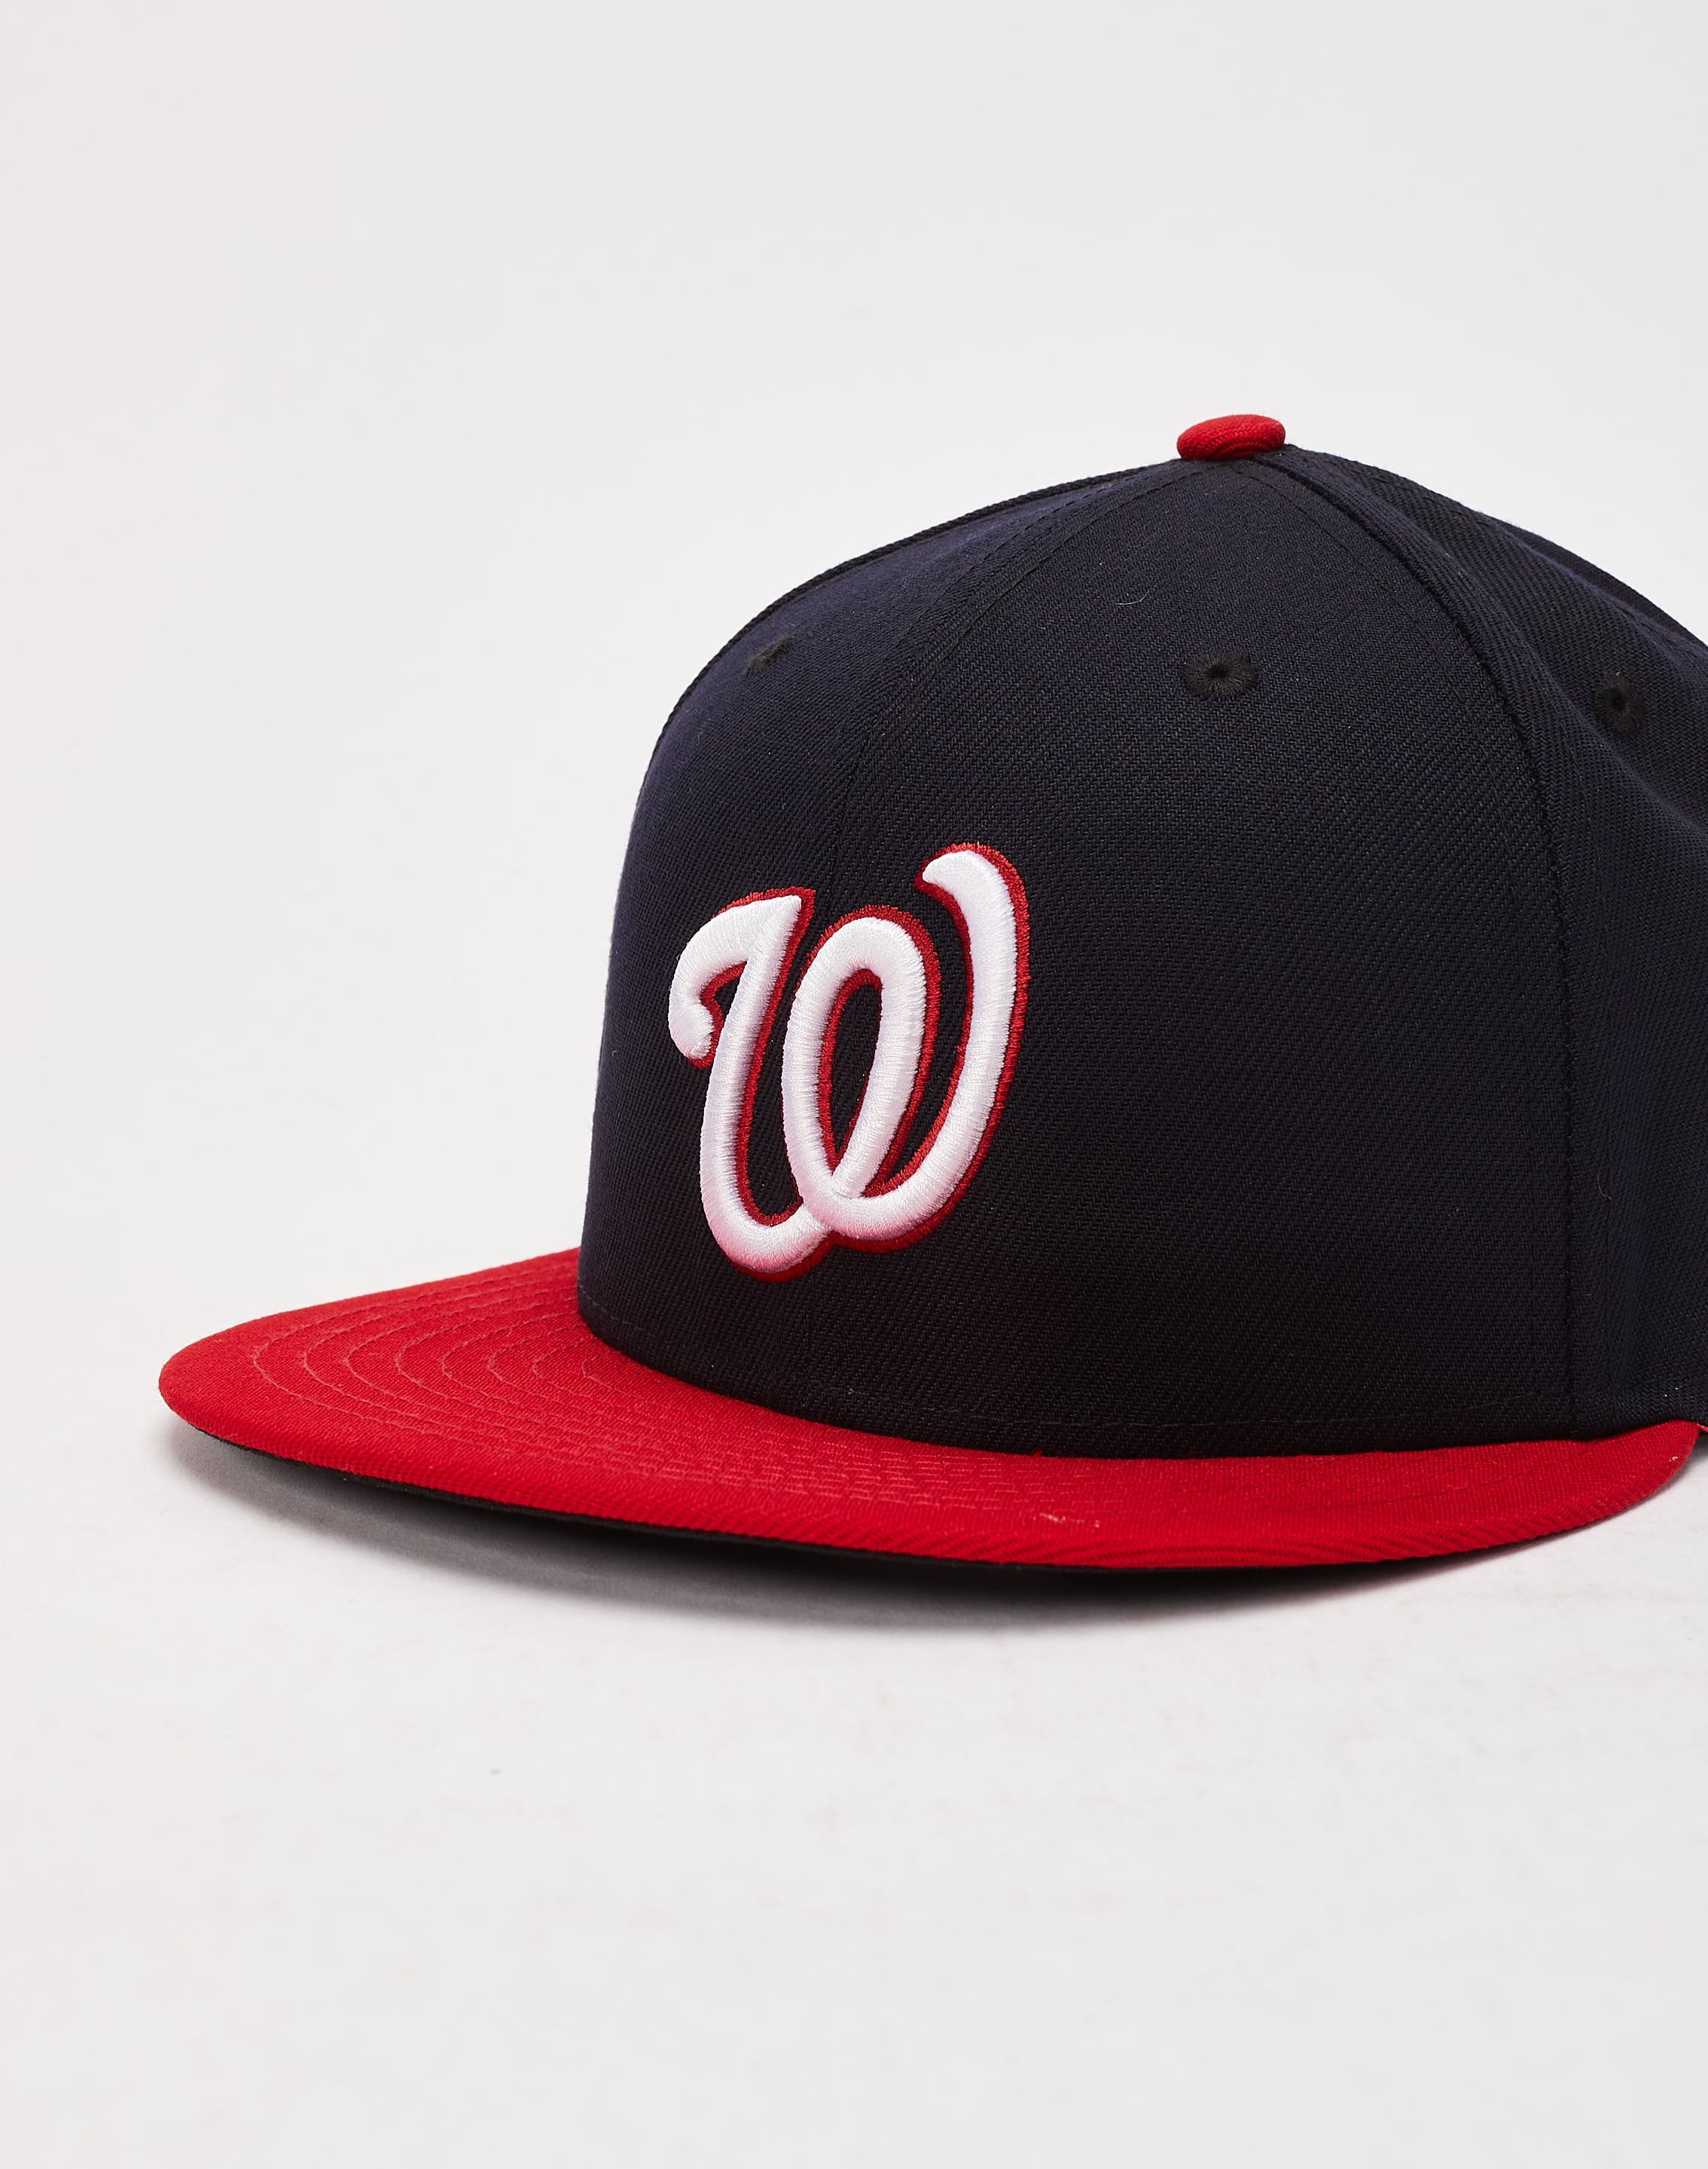 new era washington nationals hat for Sale in Calistoga, CA - OfferUp